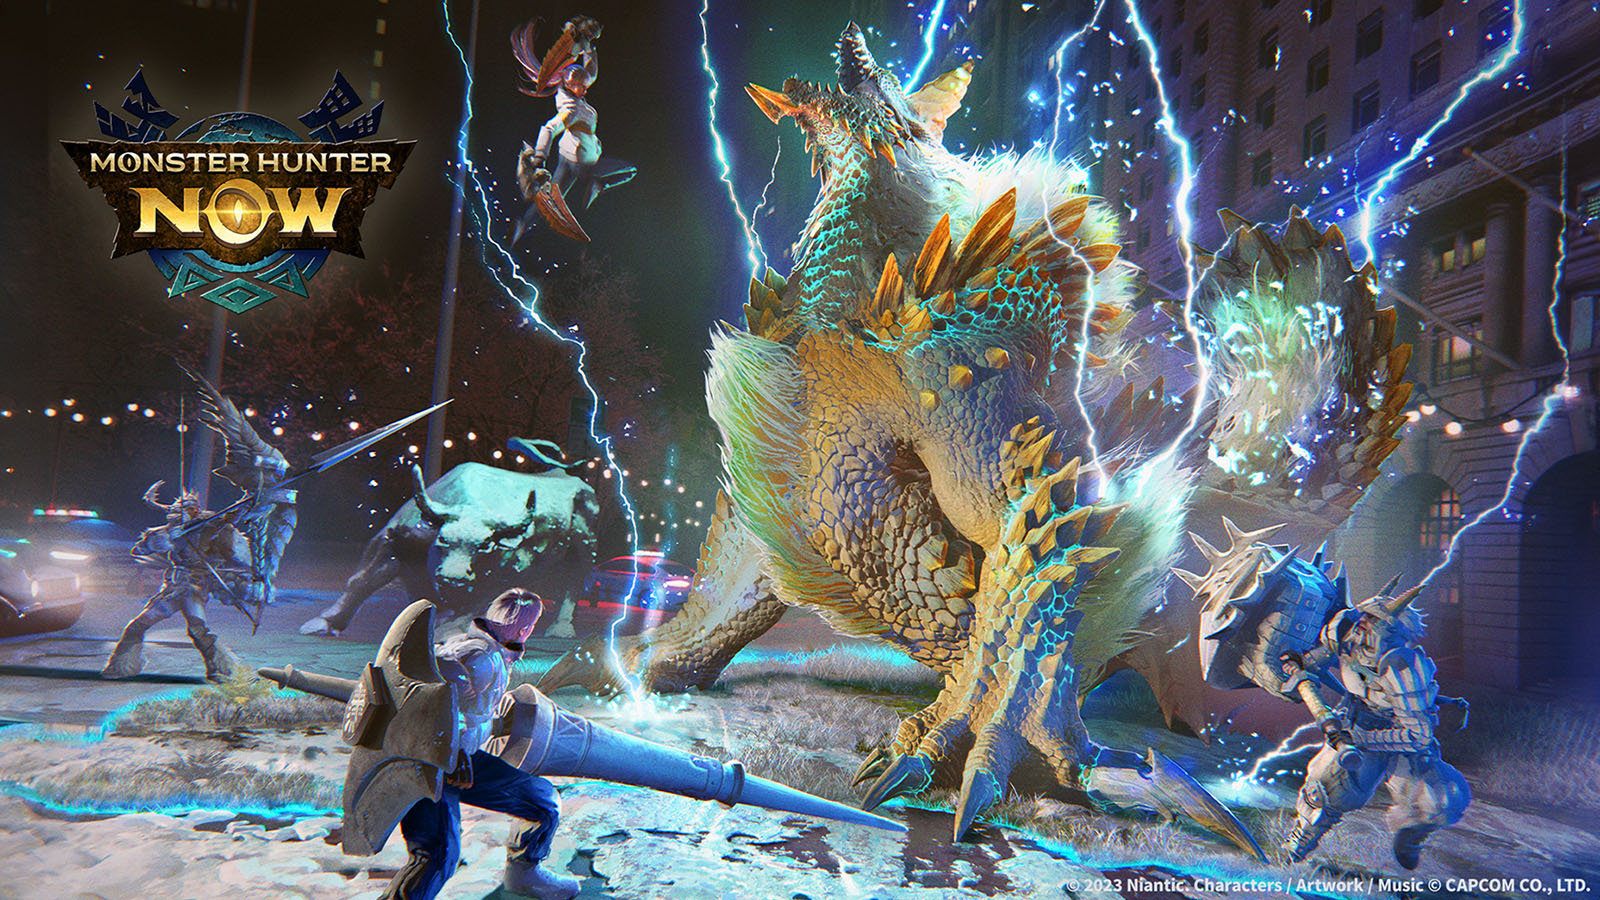 Niantic's Monster Hunter Now Brings The Hunt To The Real World